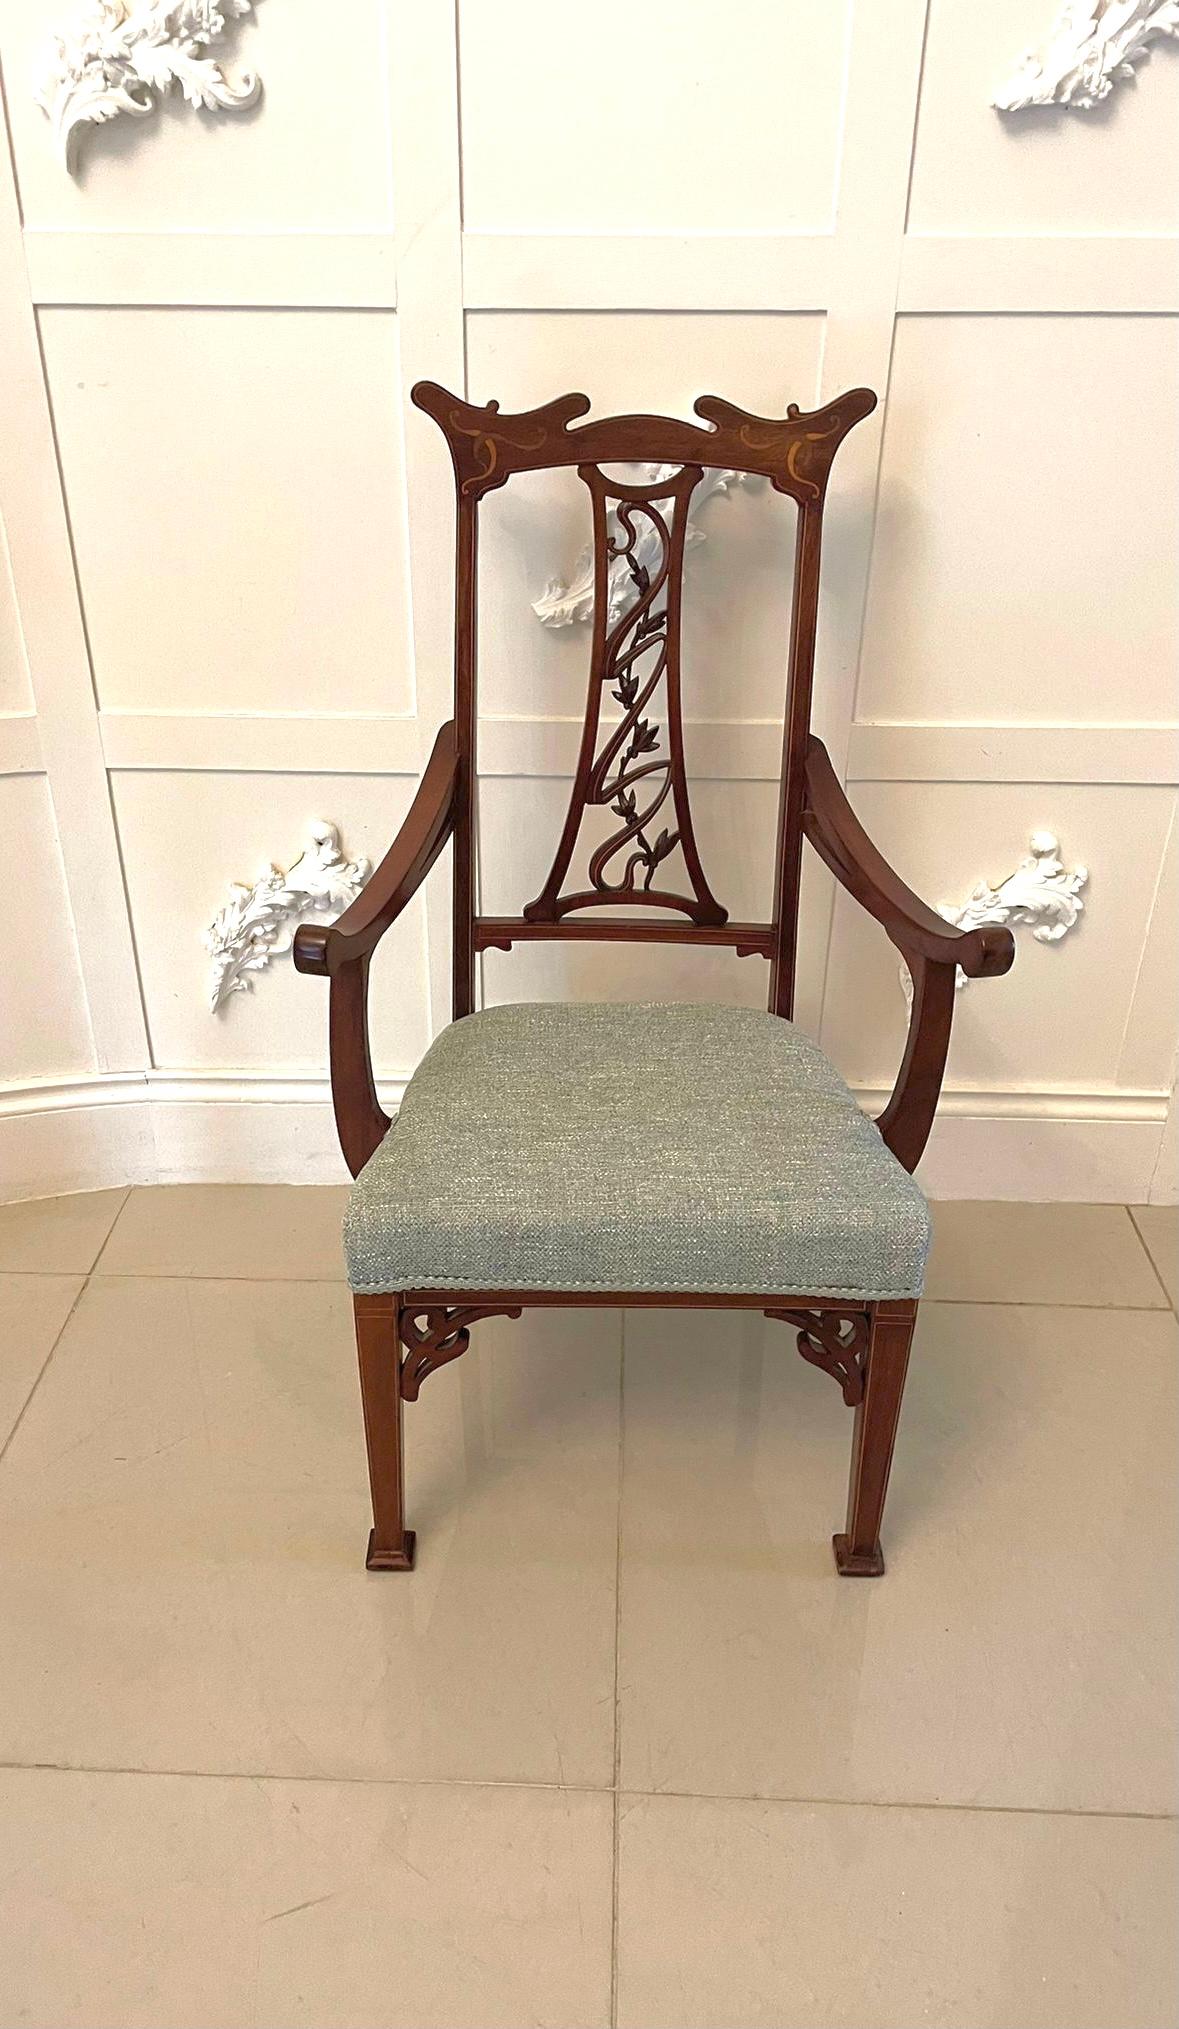 Early 20th Century Unusual Antique Art Nouveau Quality Mahogany Inlaid Child’s Chair For Sale